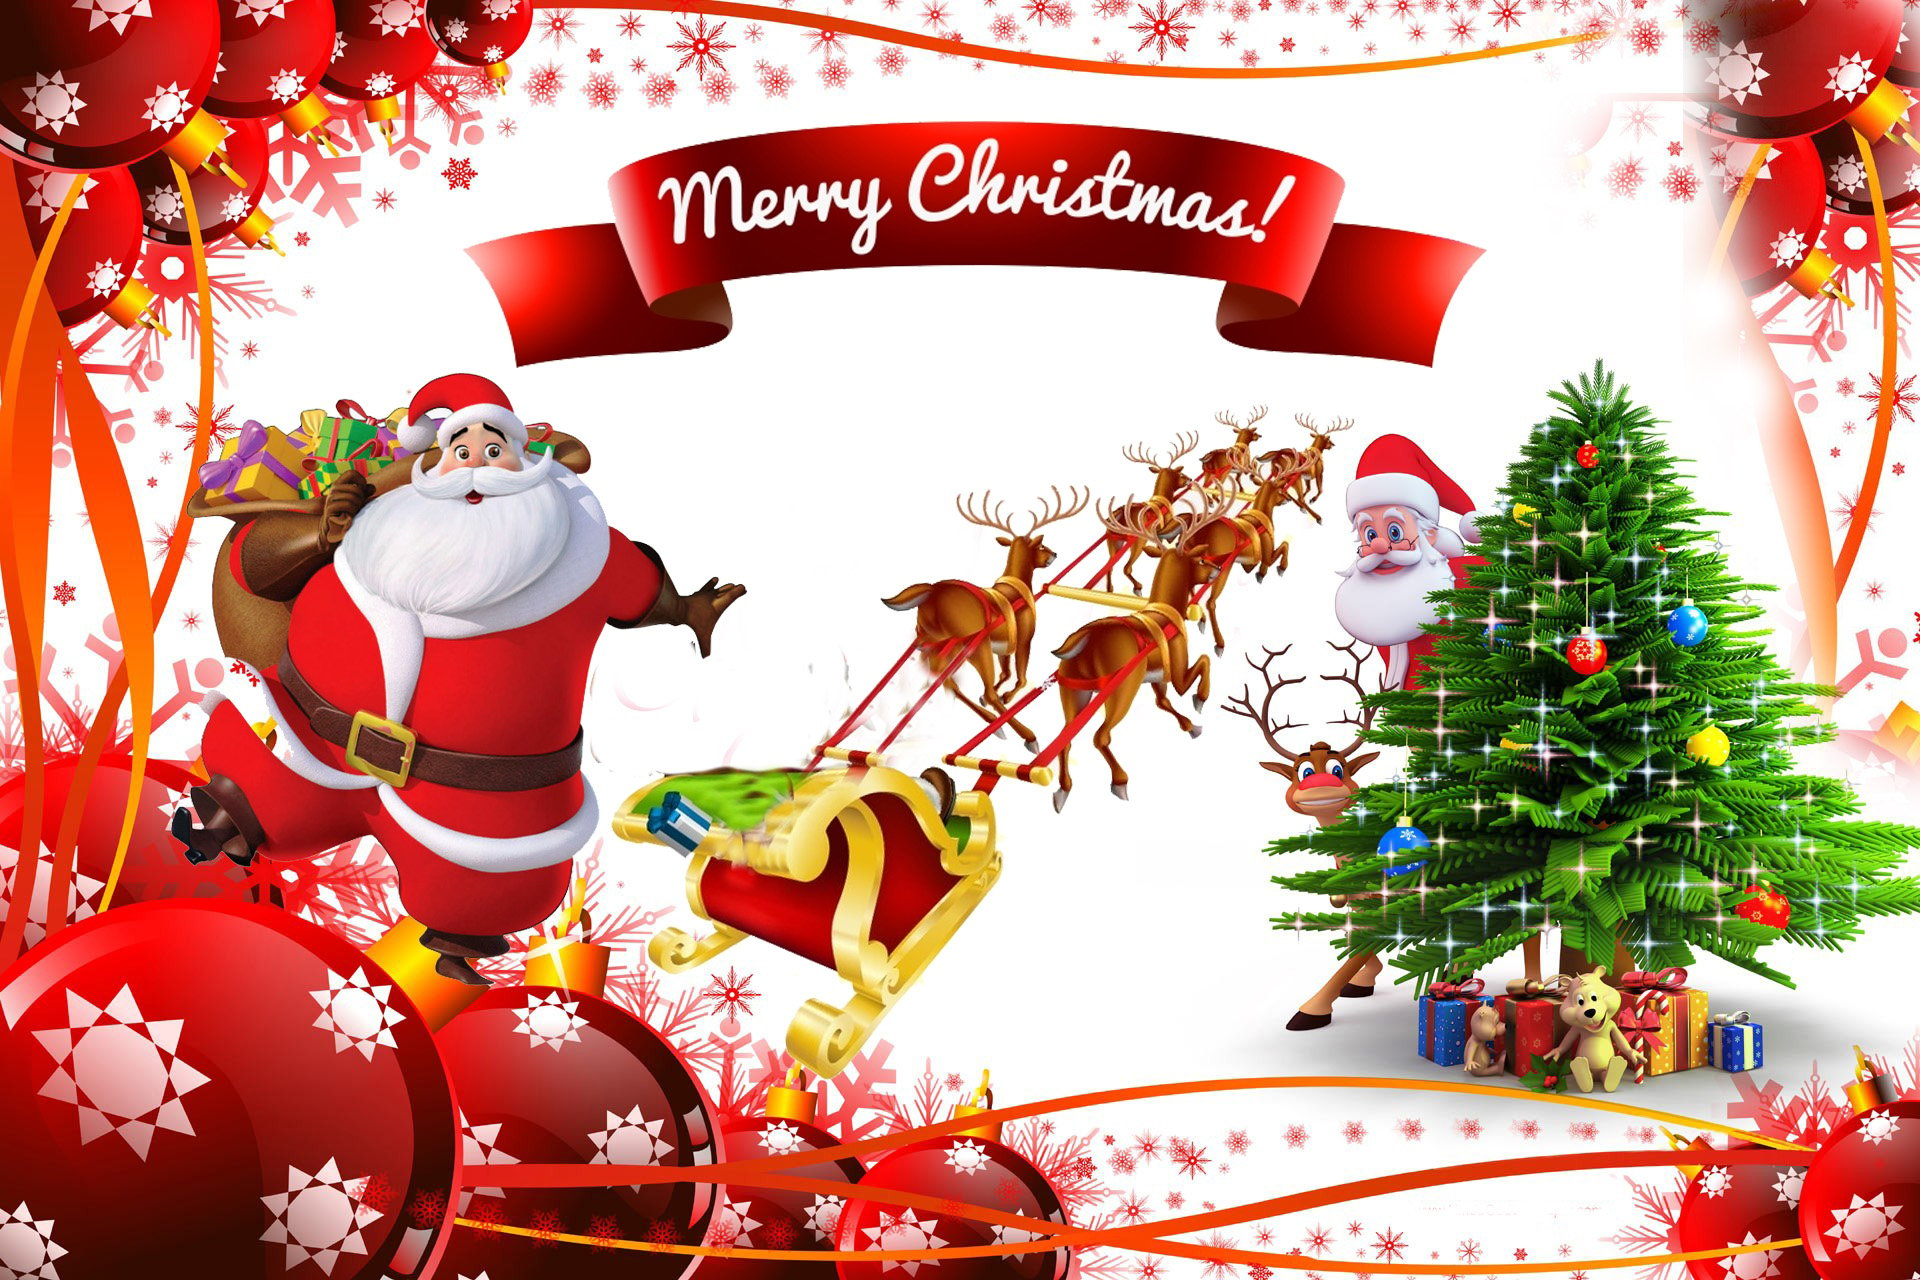 Importance of Marry Christmas Day Merry Christmas 2019 Images